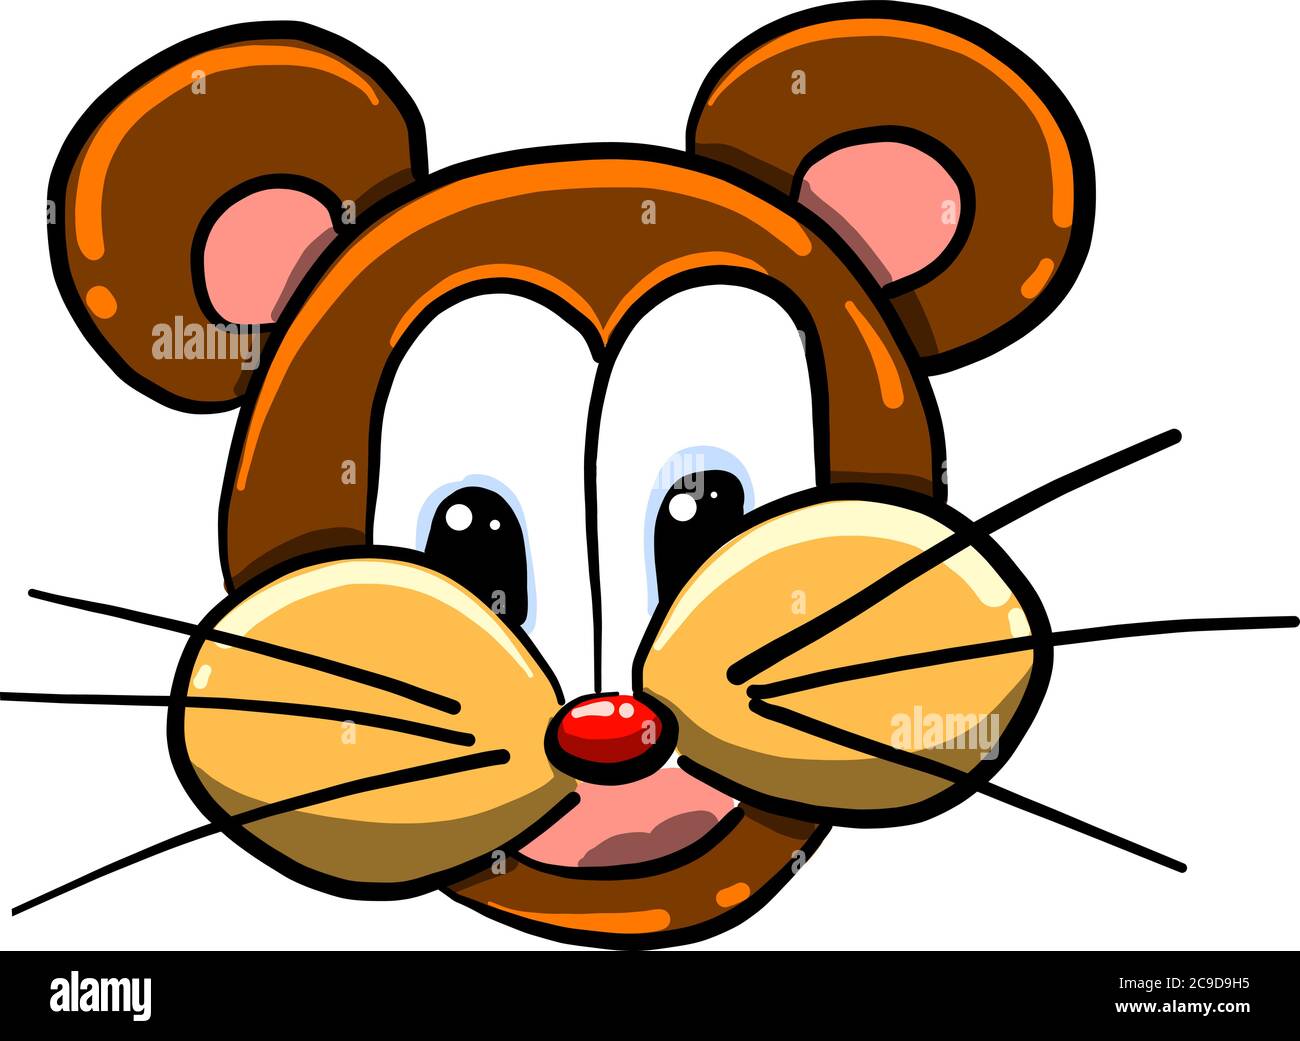 Funny mouse, illustration, vector on white background Stock Vector